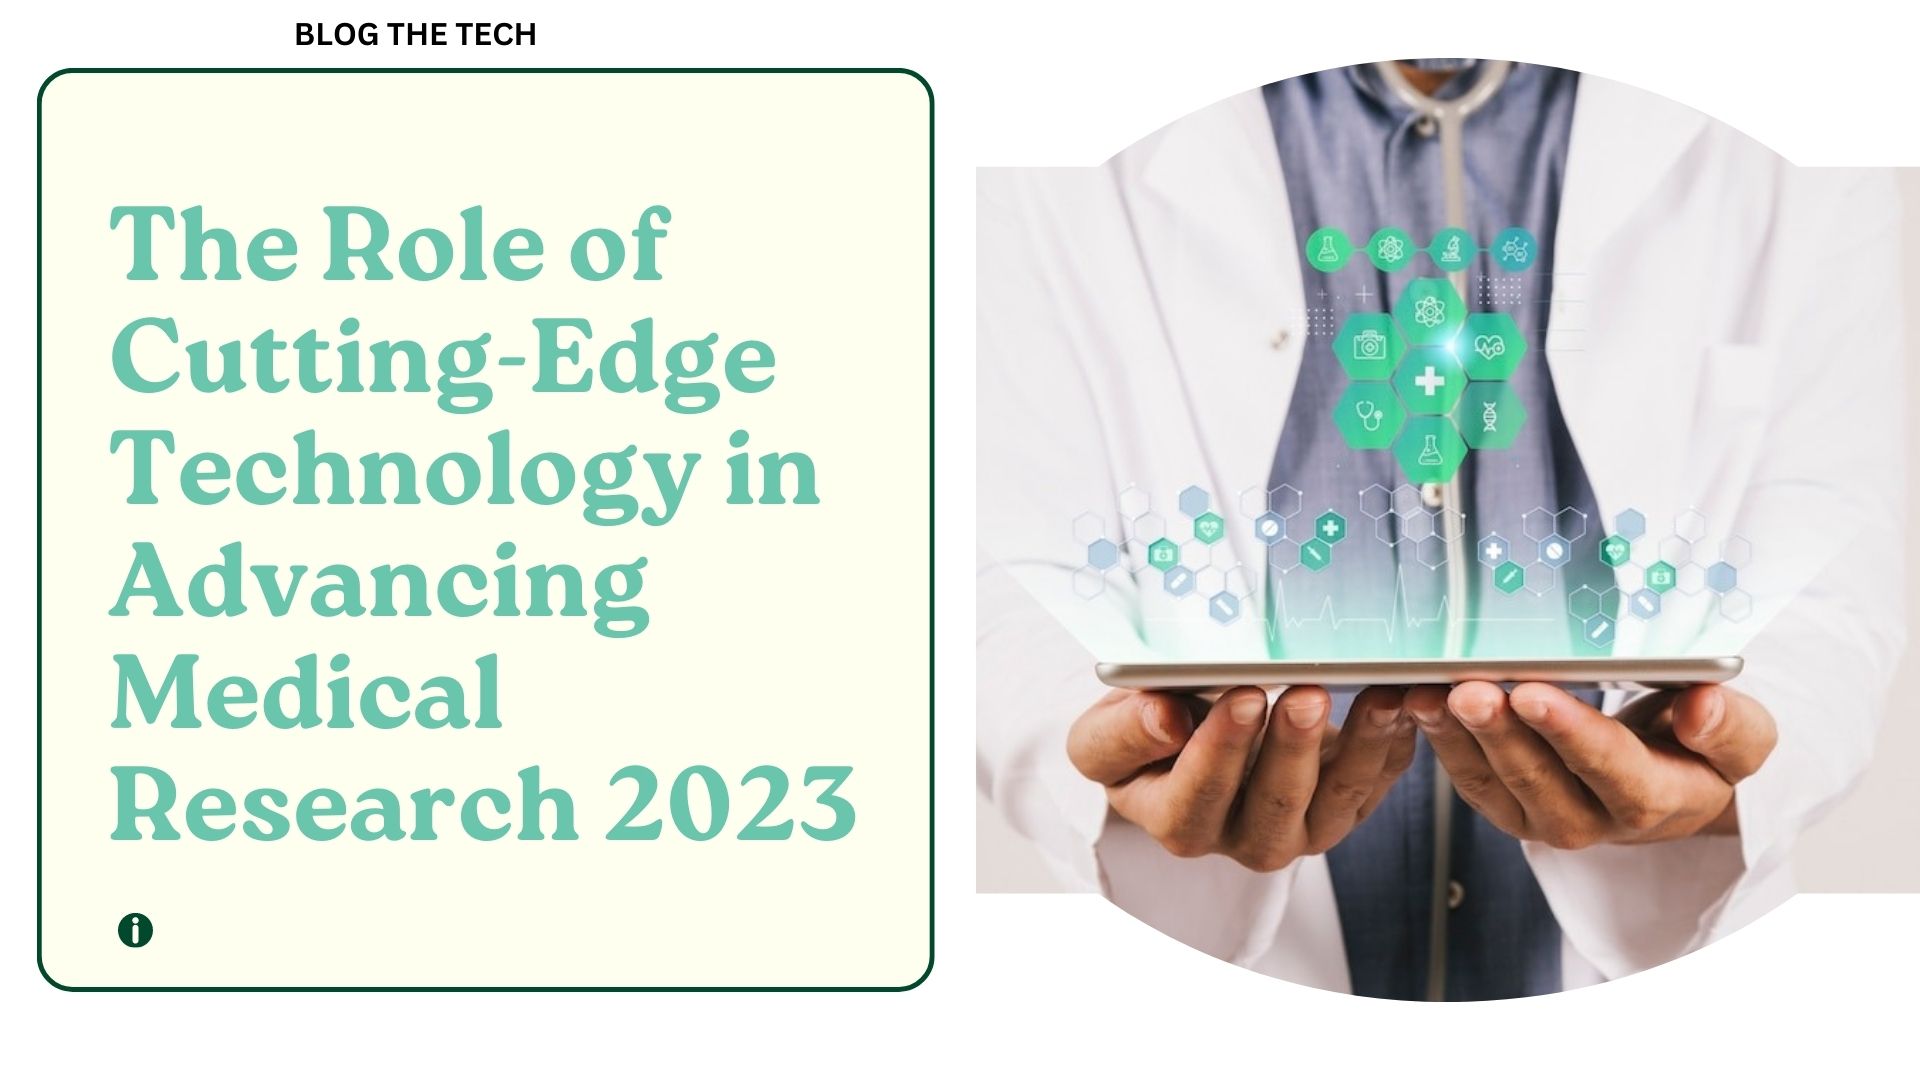 The Role of Cutting Edge Technology in Advancing Medical Research 2023